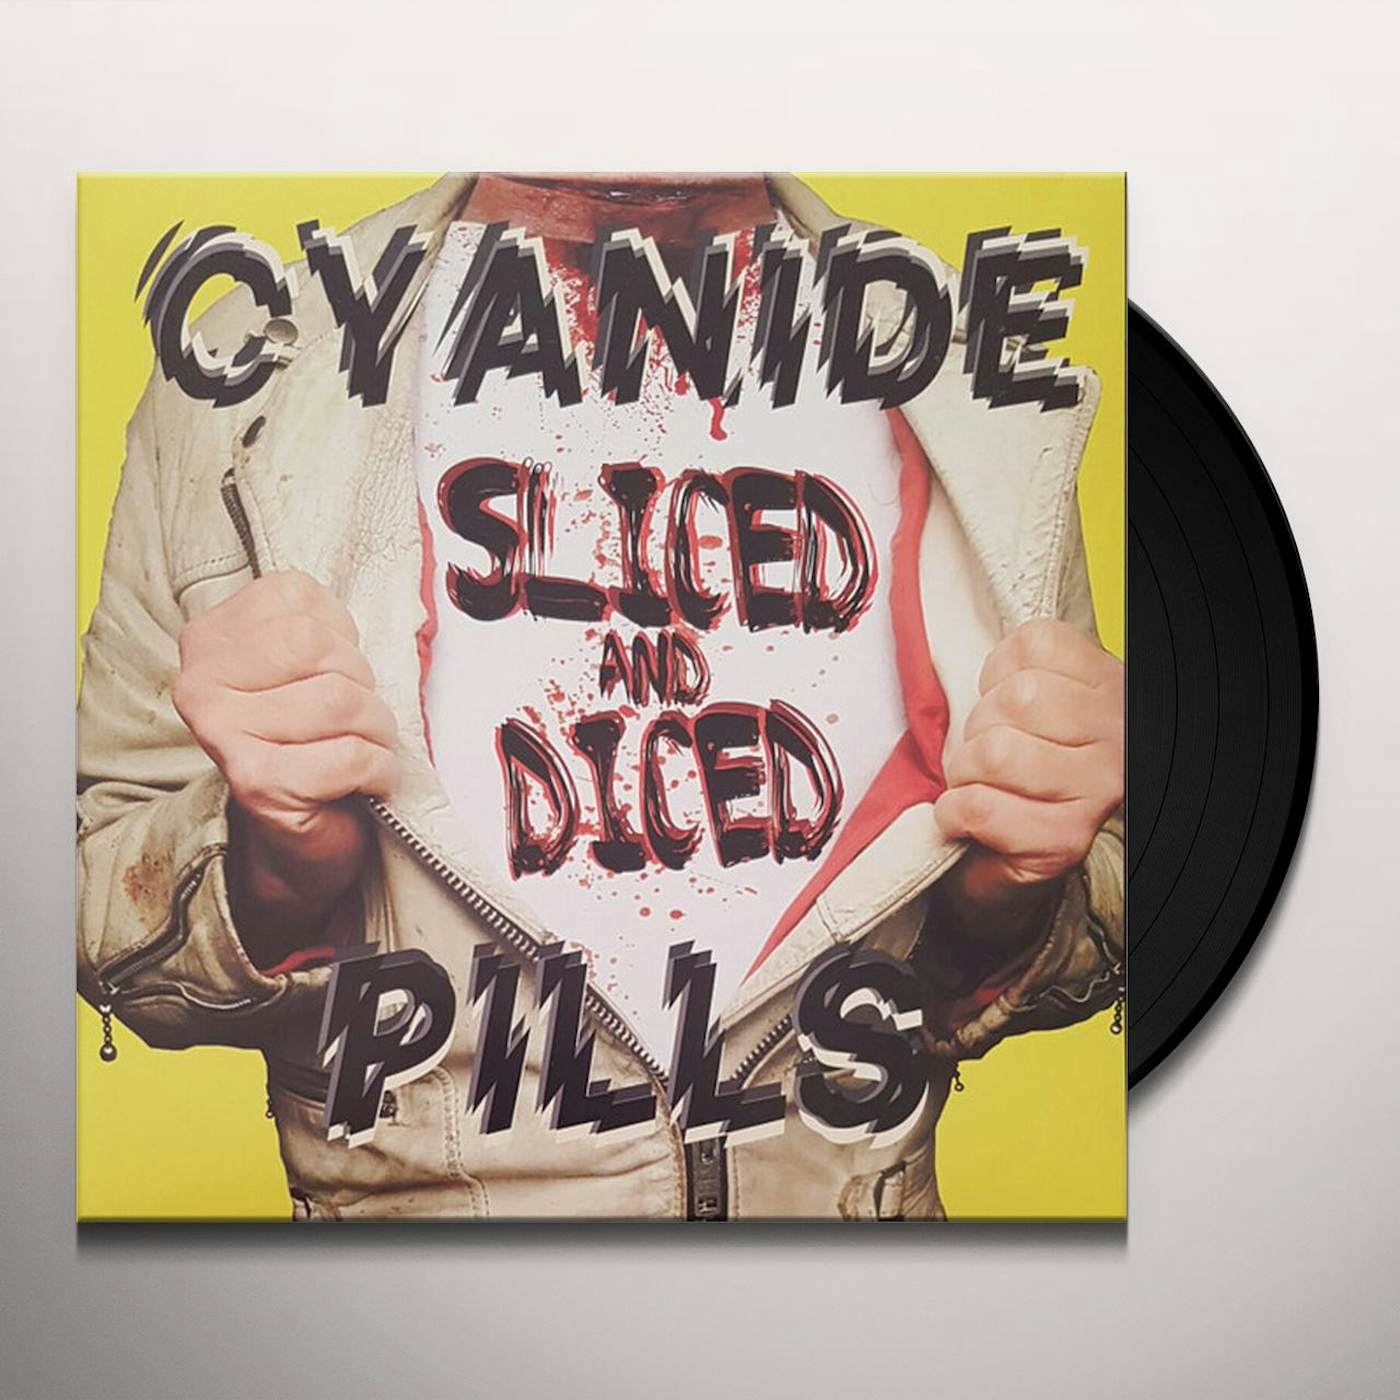 Cyanide Pills Sliced And Diced Vinyl Record